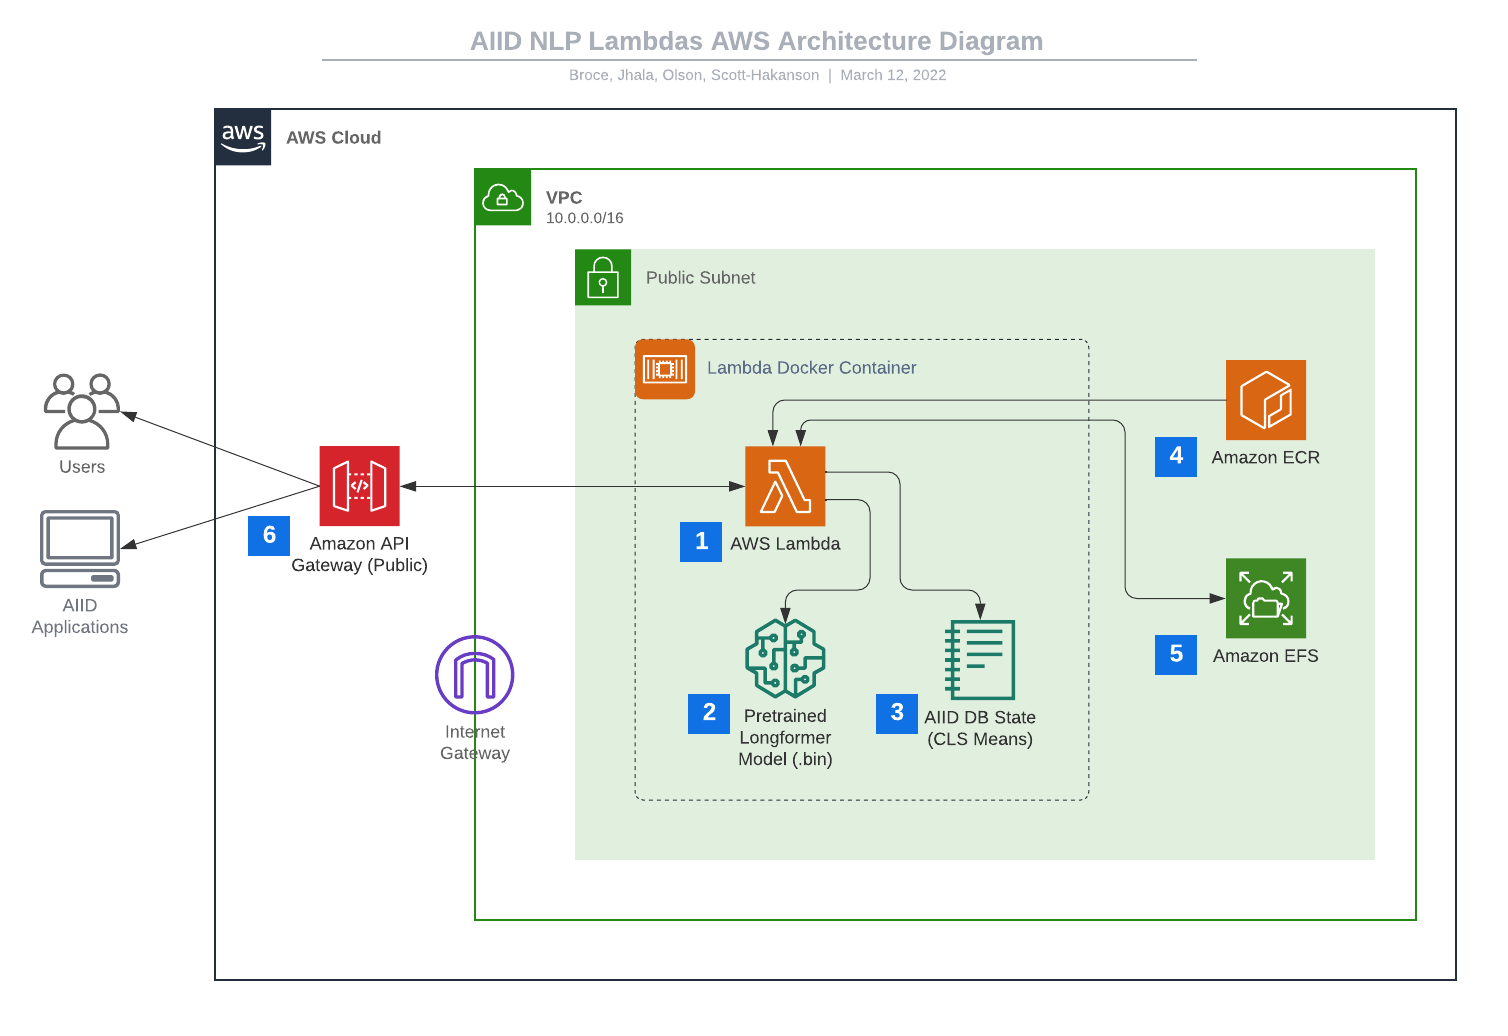 An architecture diagram showing the following connections: 1. AWS Lambda → 2. Pretrained LongFormer Model (.bin), 1. AWS Lambda → 3. AIID DB State (CLS Means), 4. Amazon ECR → 1. AWS Lambda, 1. AWS Lambda ↔ 5. Amazon EFS, 6. Amazon API Gateway (Public) ↔ 1. AWS Lambda, 6. Amazon API Gateway (Public) → Users, 6. Amazon API Gateway (Public) → AIID Applications. Items 1–3 are inside a box labelled “Lambda Docker Container.” Items 1–5 are inside a box labelled VPC 10.0.0/16. On the border of that box is an icon showing a doorframe labelled “Internet Gateway.” Within that box is another marked by a lock icon labelled “Public Subnet.” Items 1–6 are inside a box labeled “AWS cloud.”